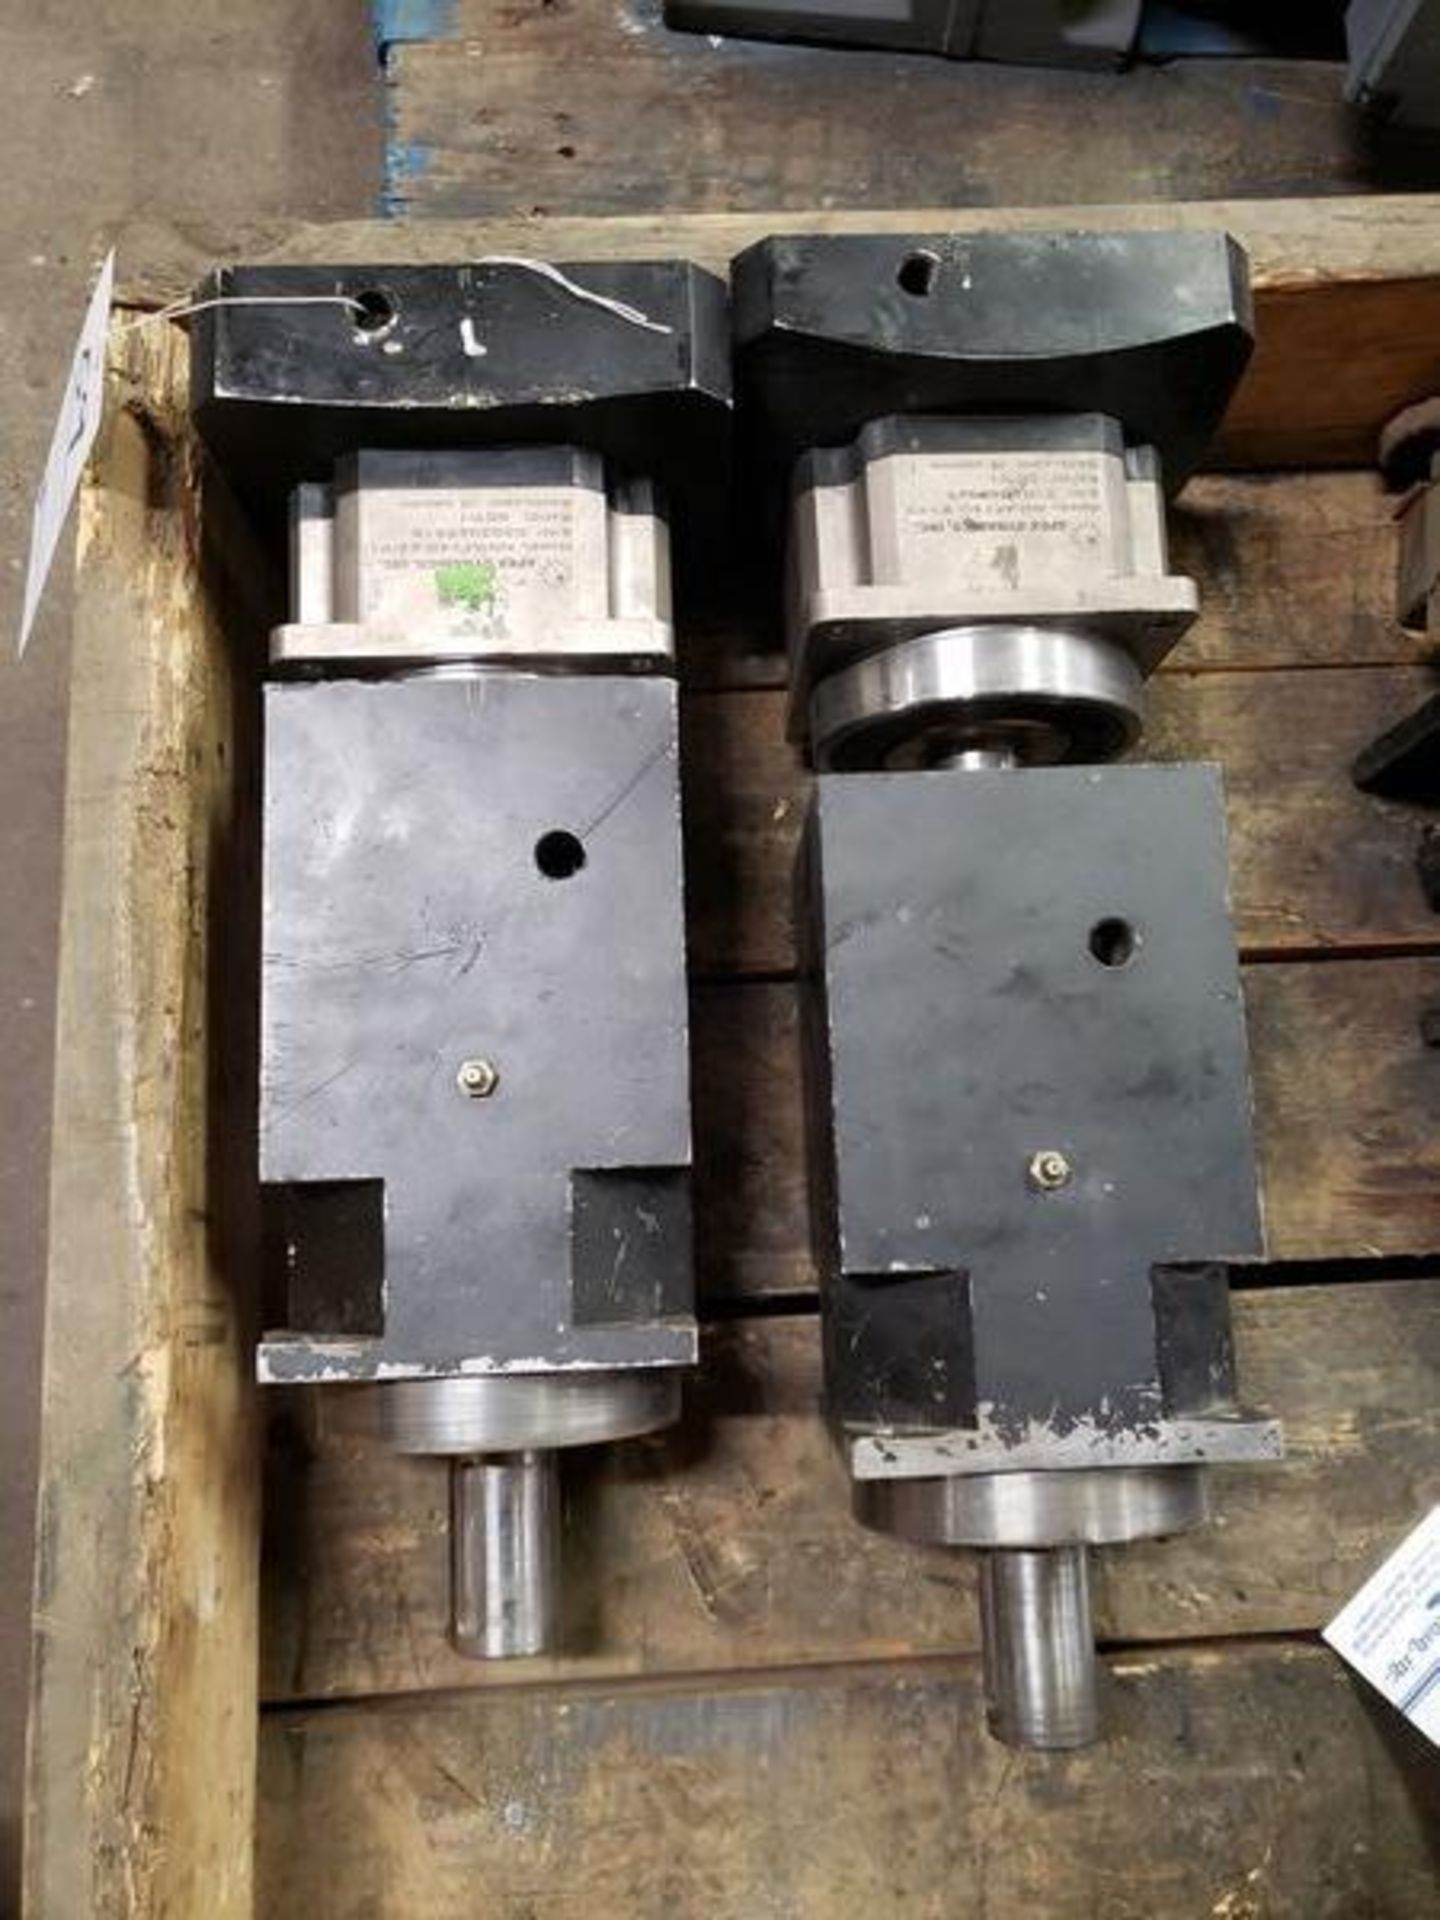 APEX DYNAMICS AF SERIES PLANETARY GEAR BOXES